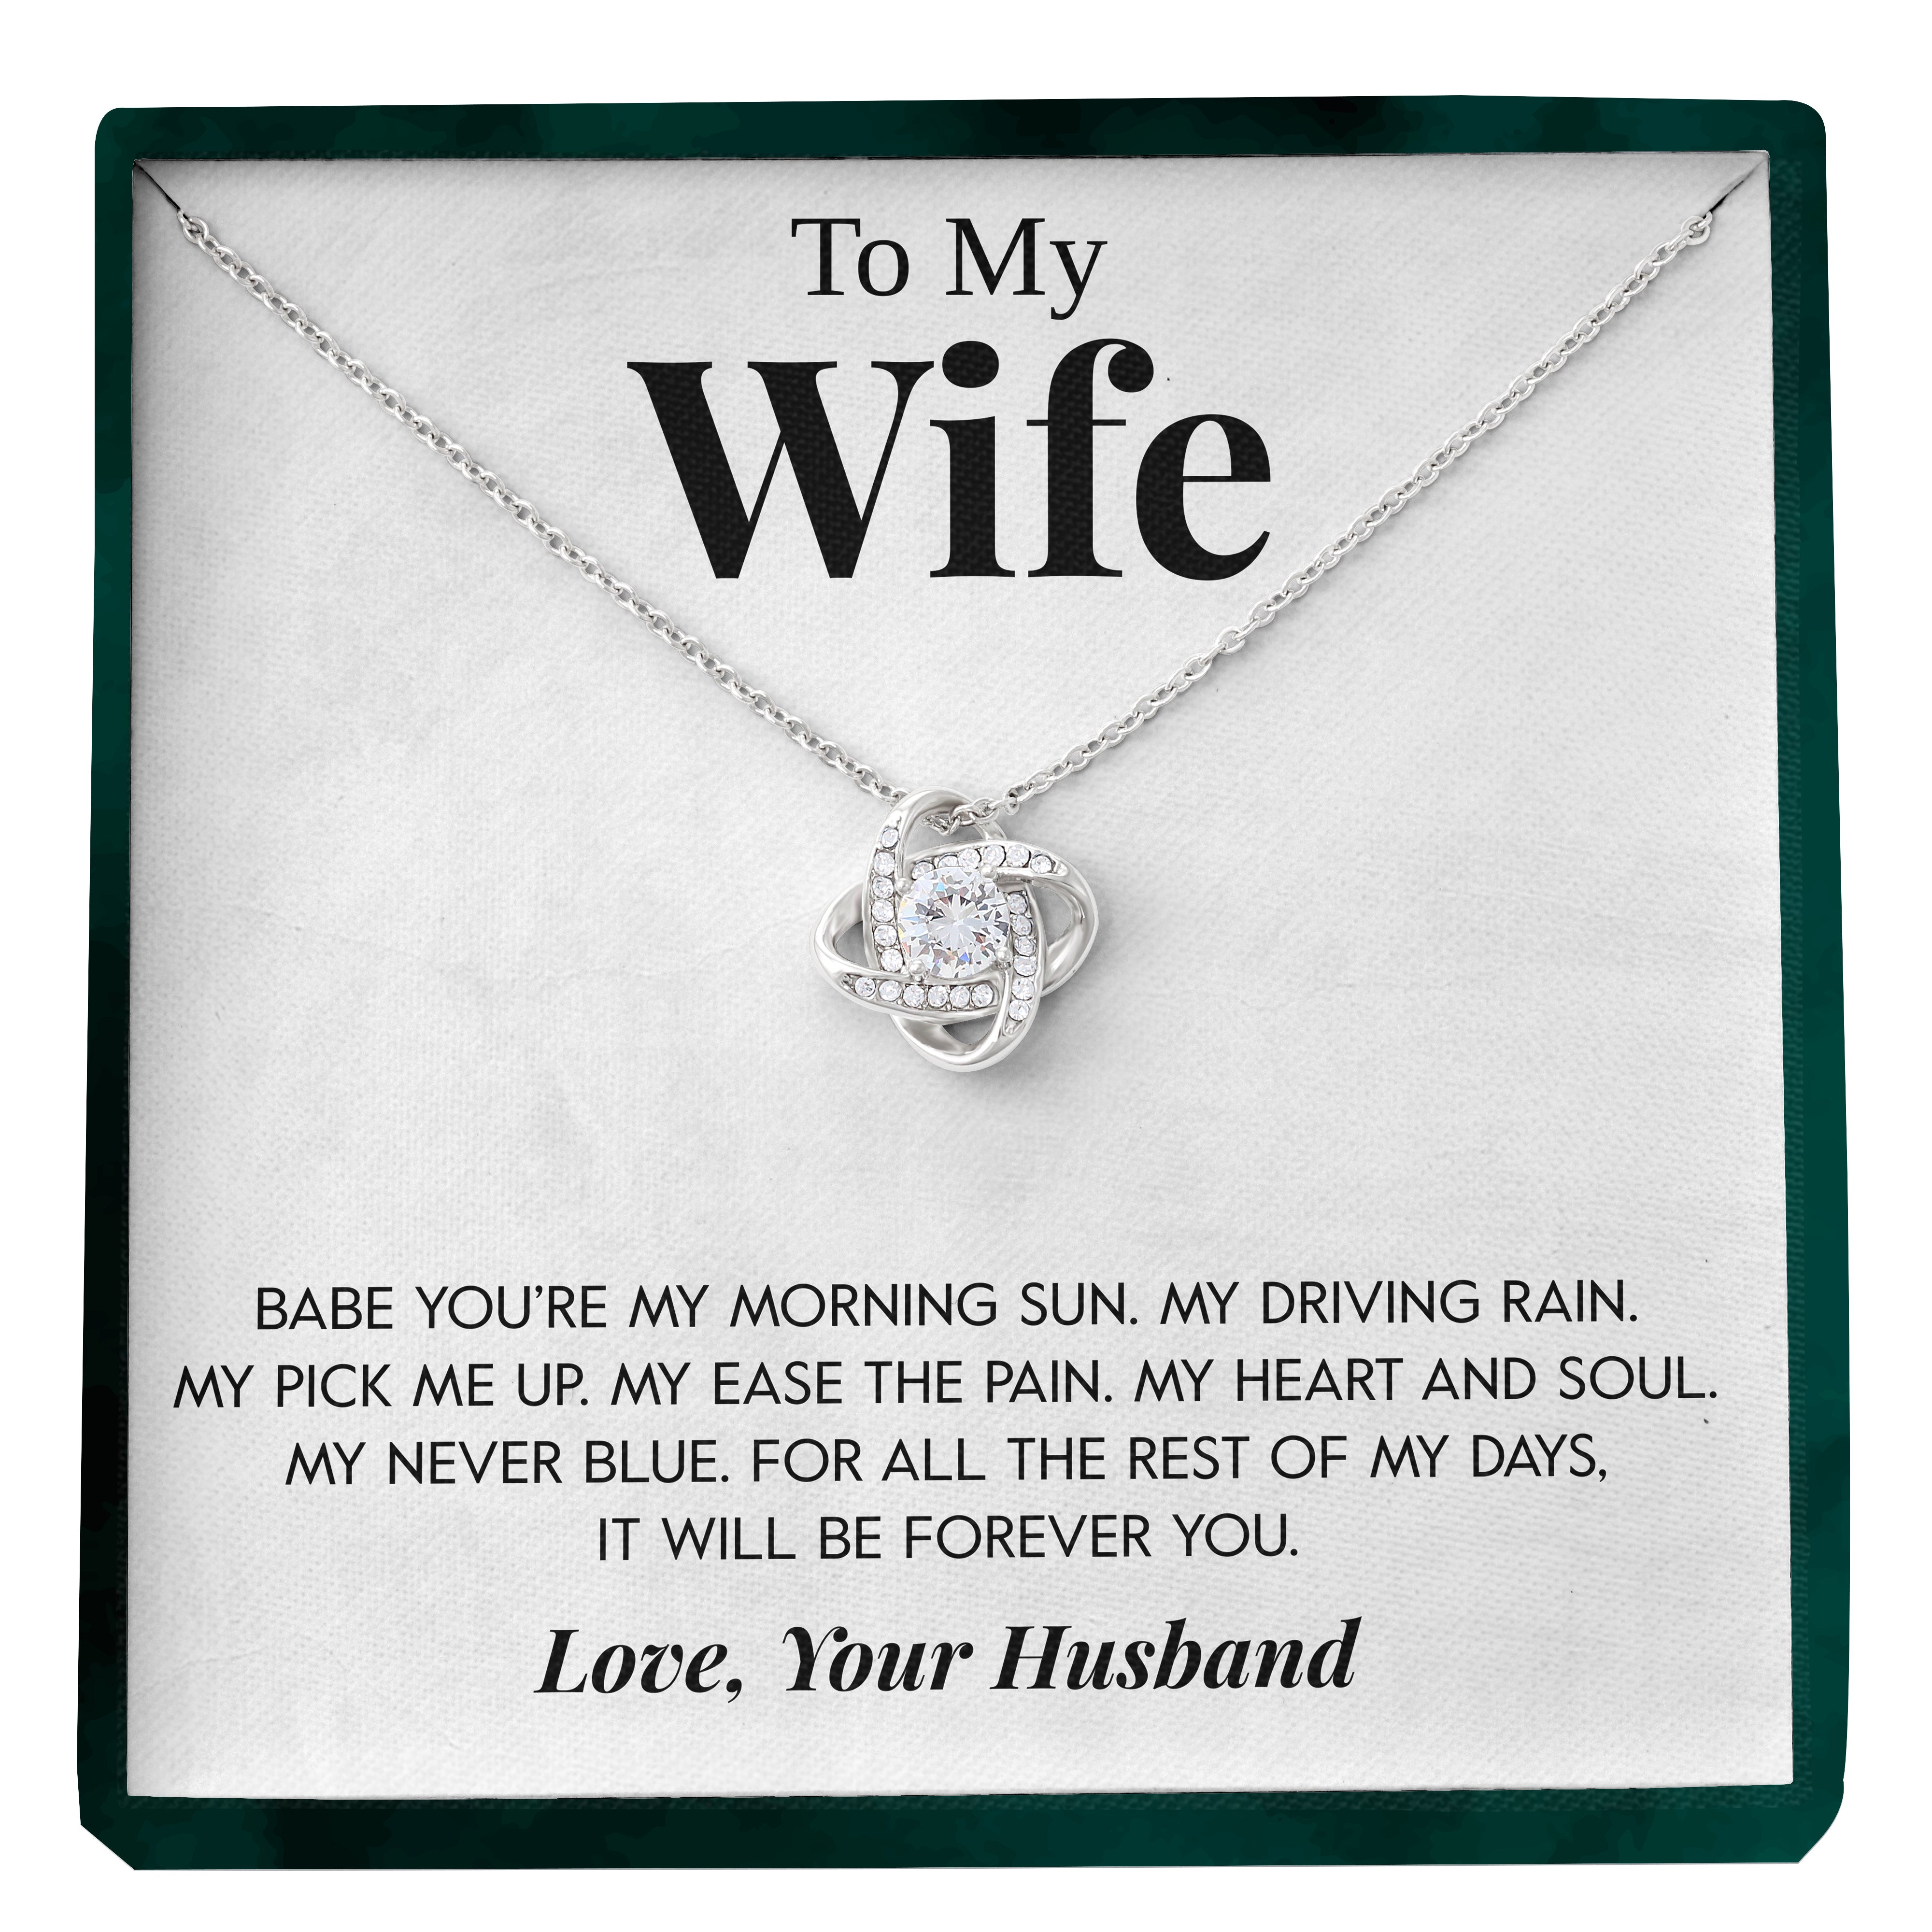 To My Wife | "My Morning Sun" | Love Knot Necklace